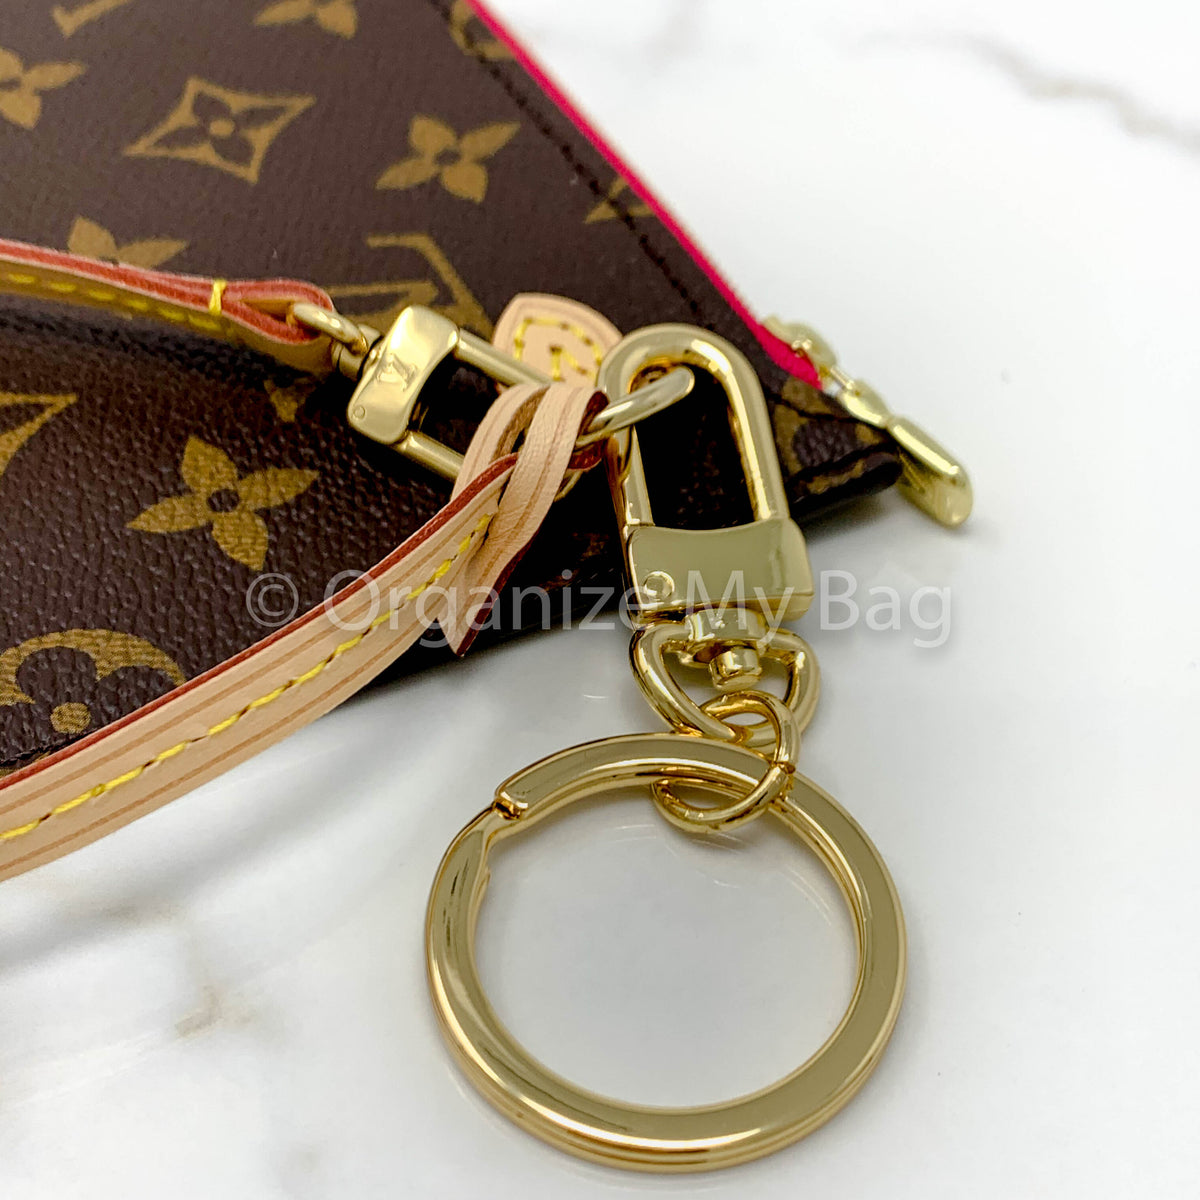 Unboxing/Reveal & Close up of My first Louis Vuitton Bag Charm